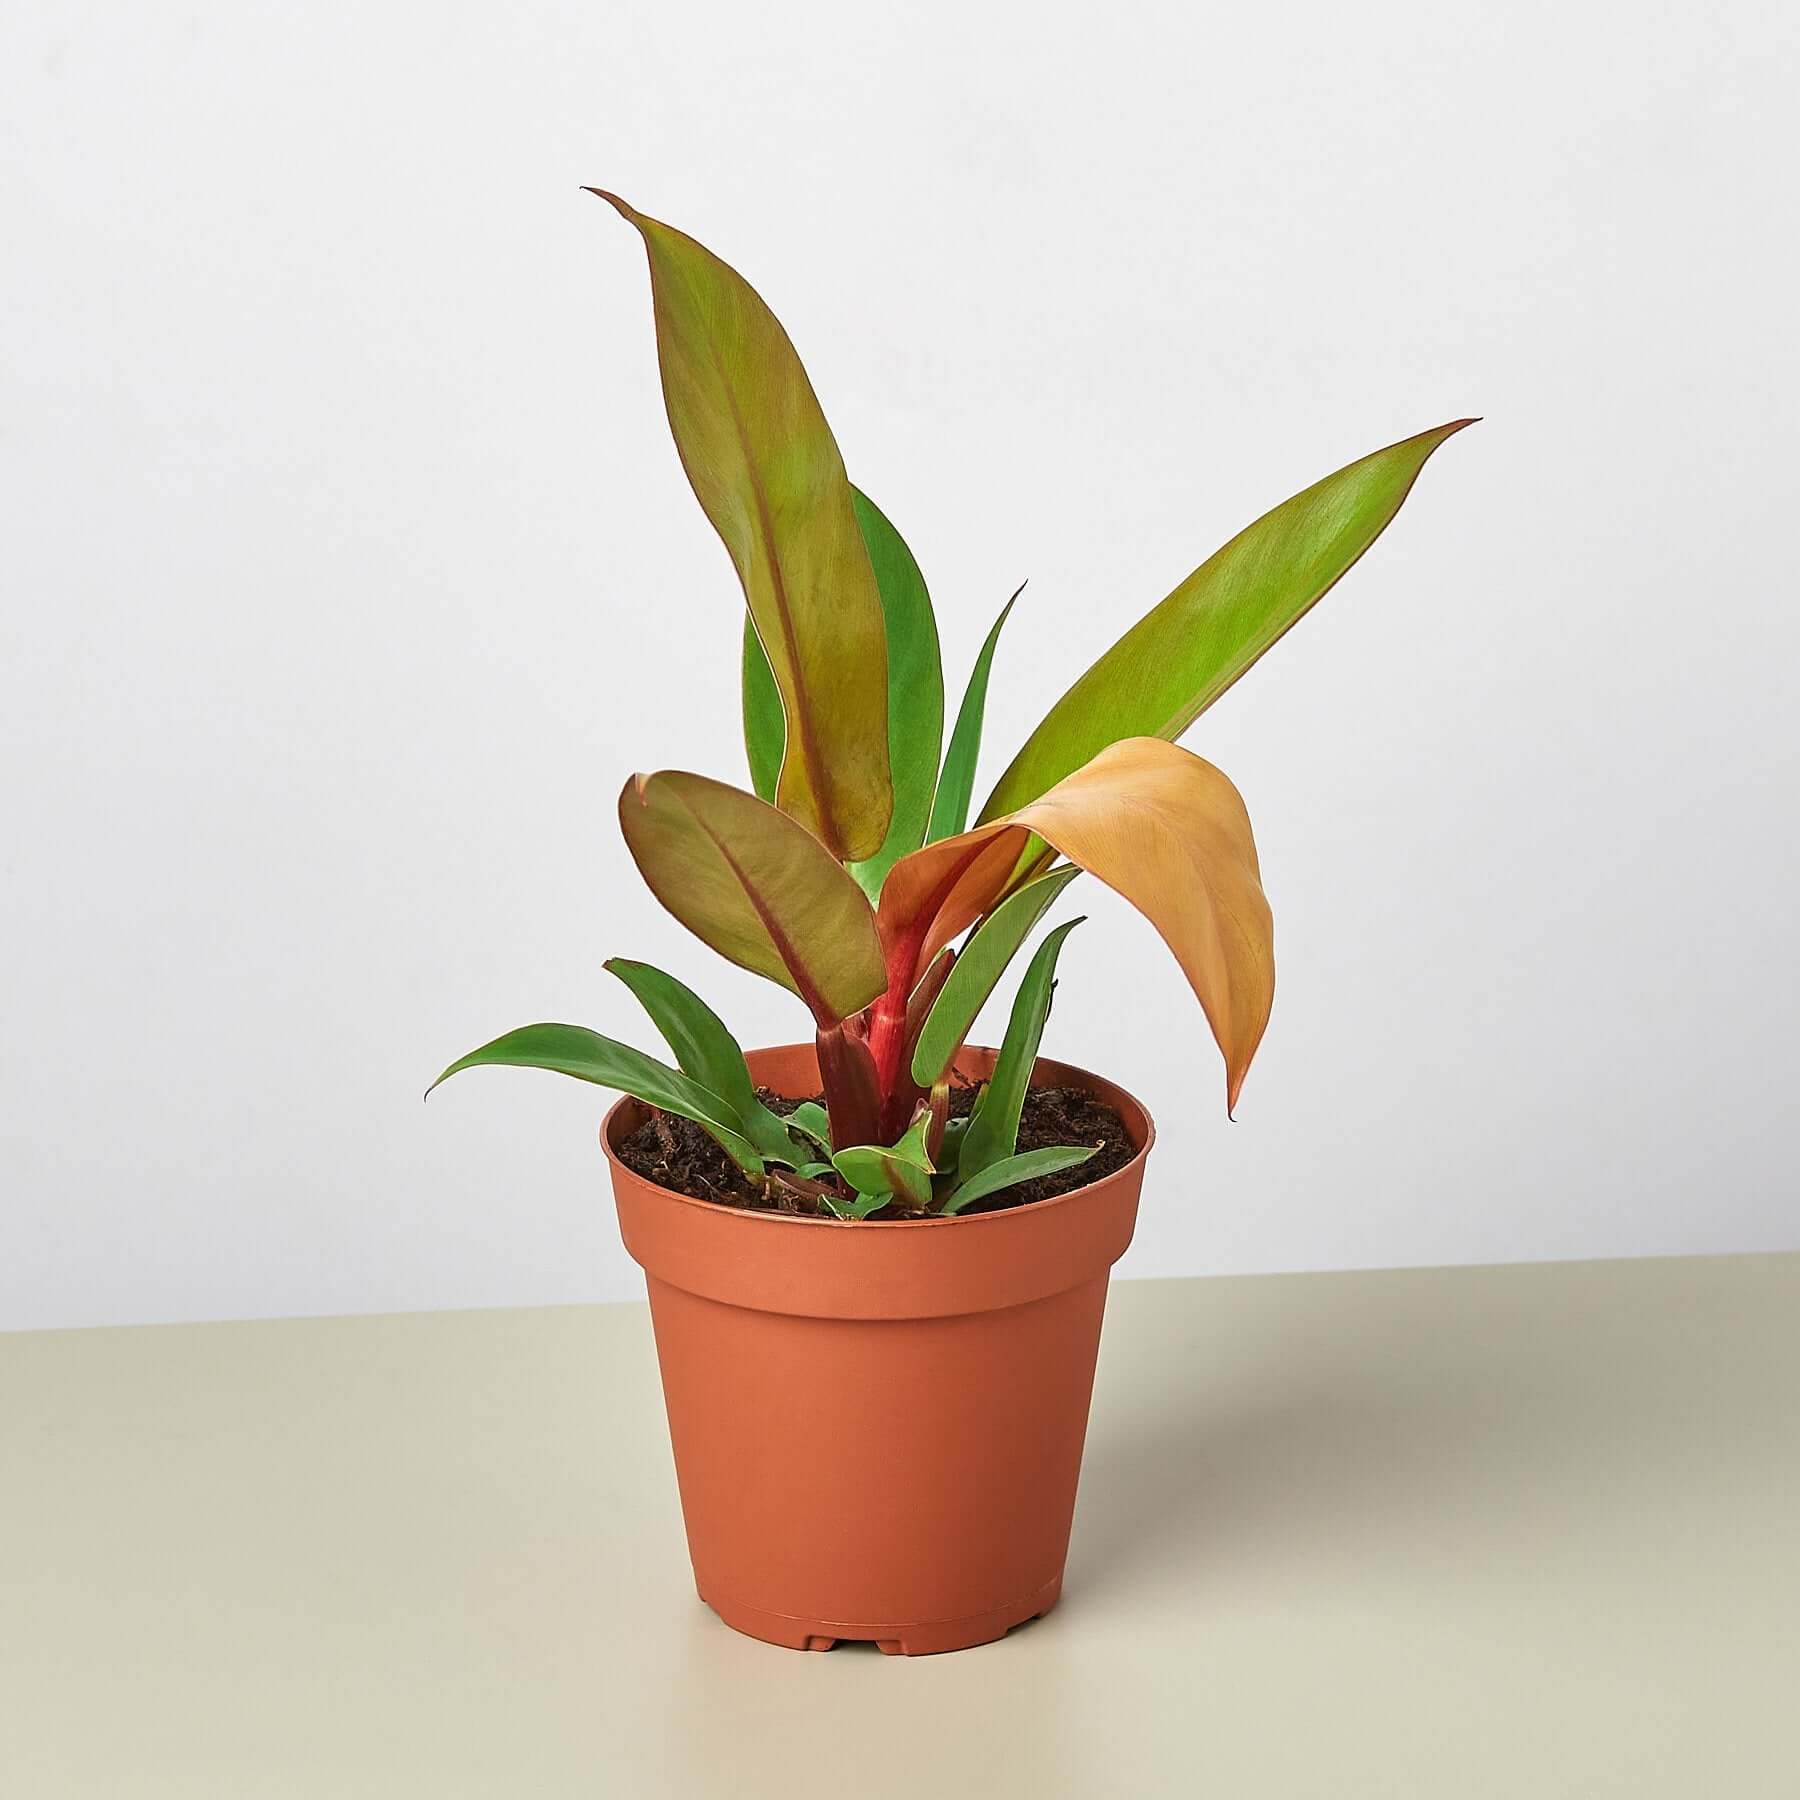 Philodendron - Prince of Orange | Modern house plants that clean the air